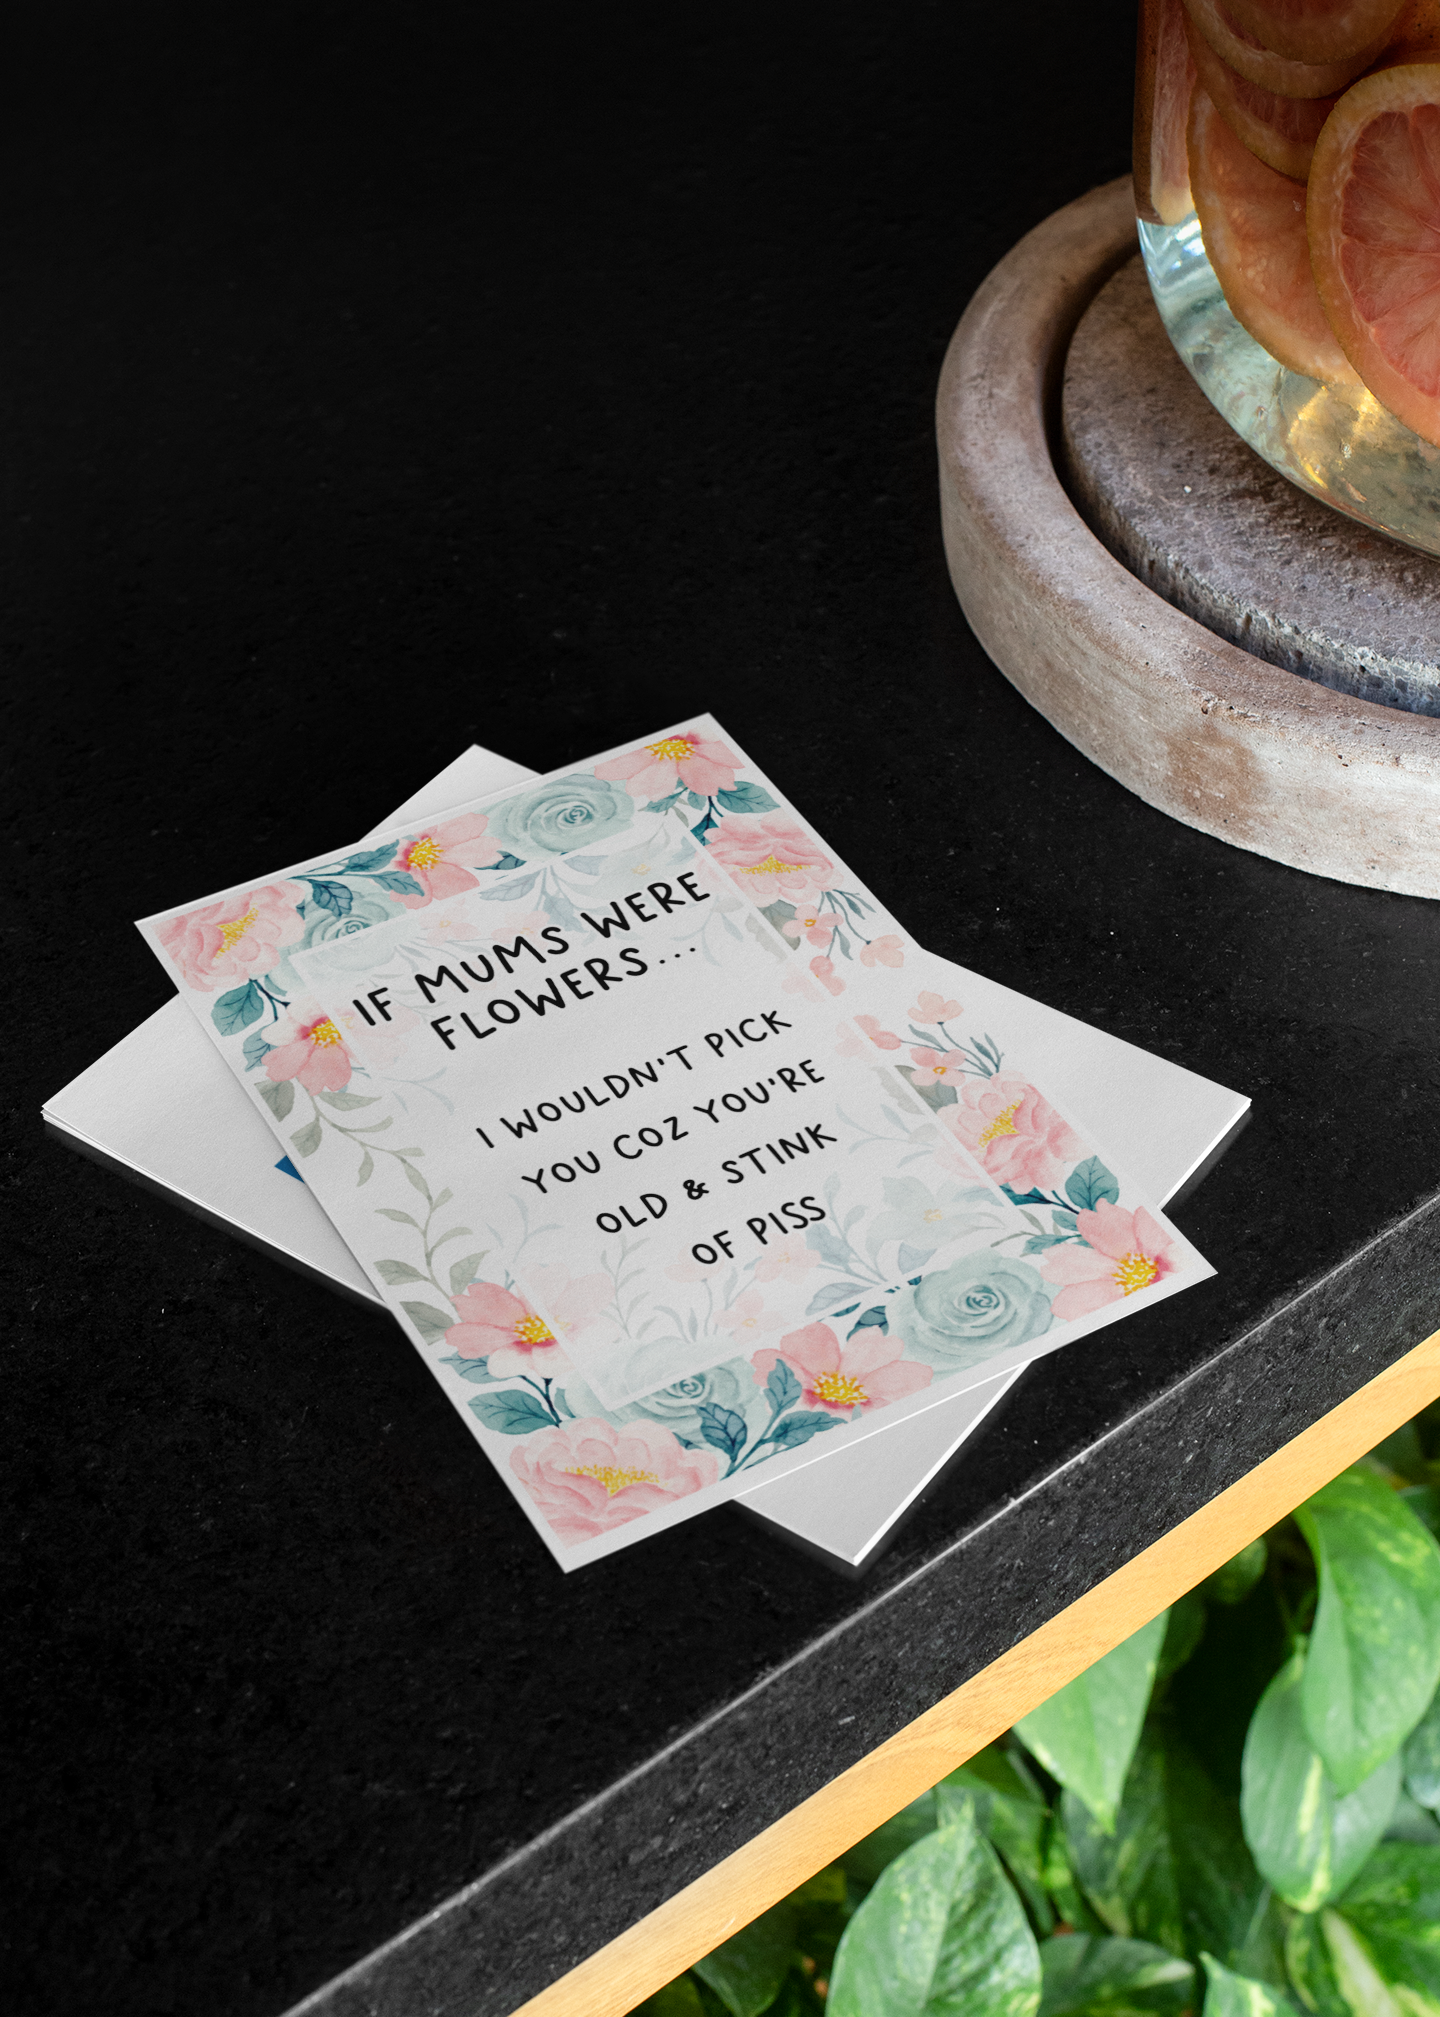 Greetings card with a pastel colour floral design to the front with the quote 'if mums were flowers... i wouldn't pick you coz you're old & stink of piss' printed in the middle in black ink. 